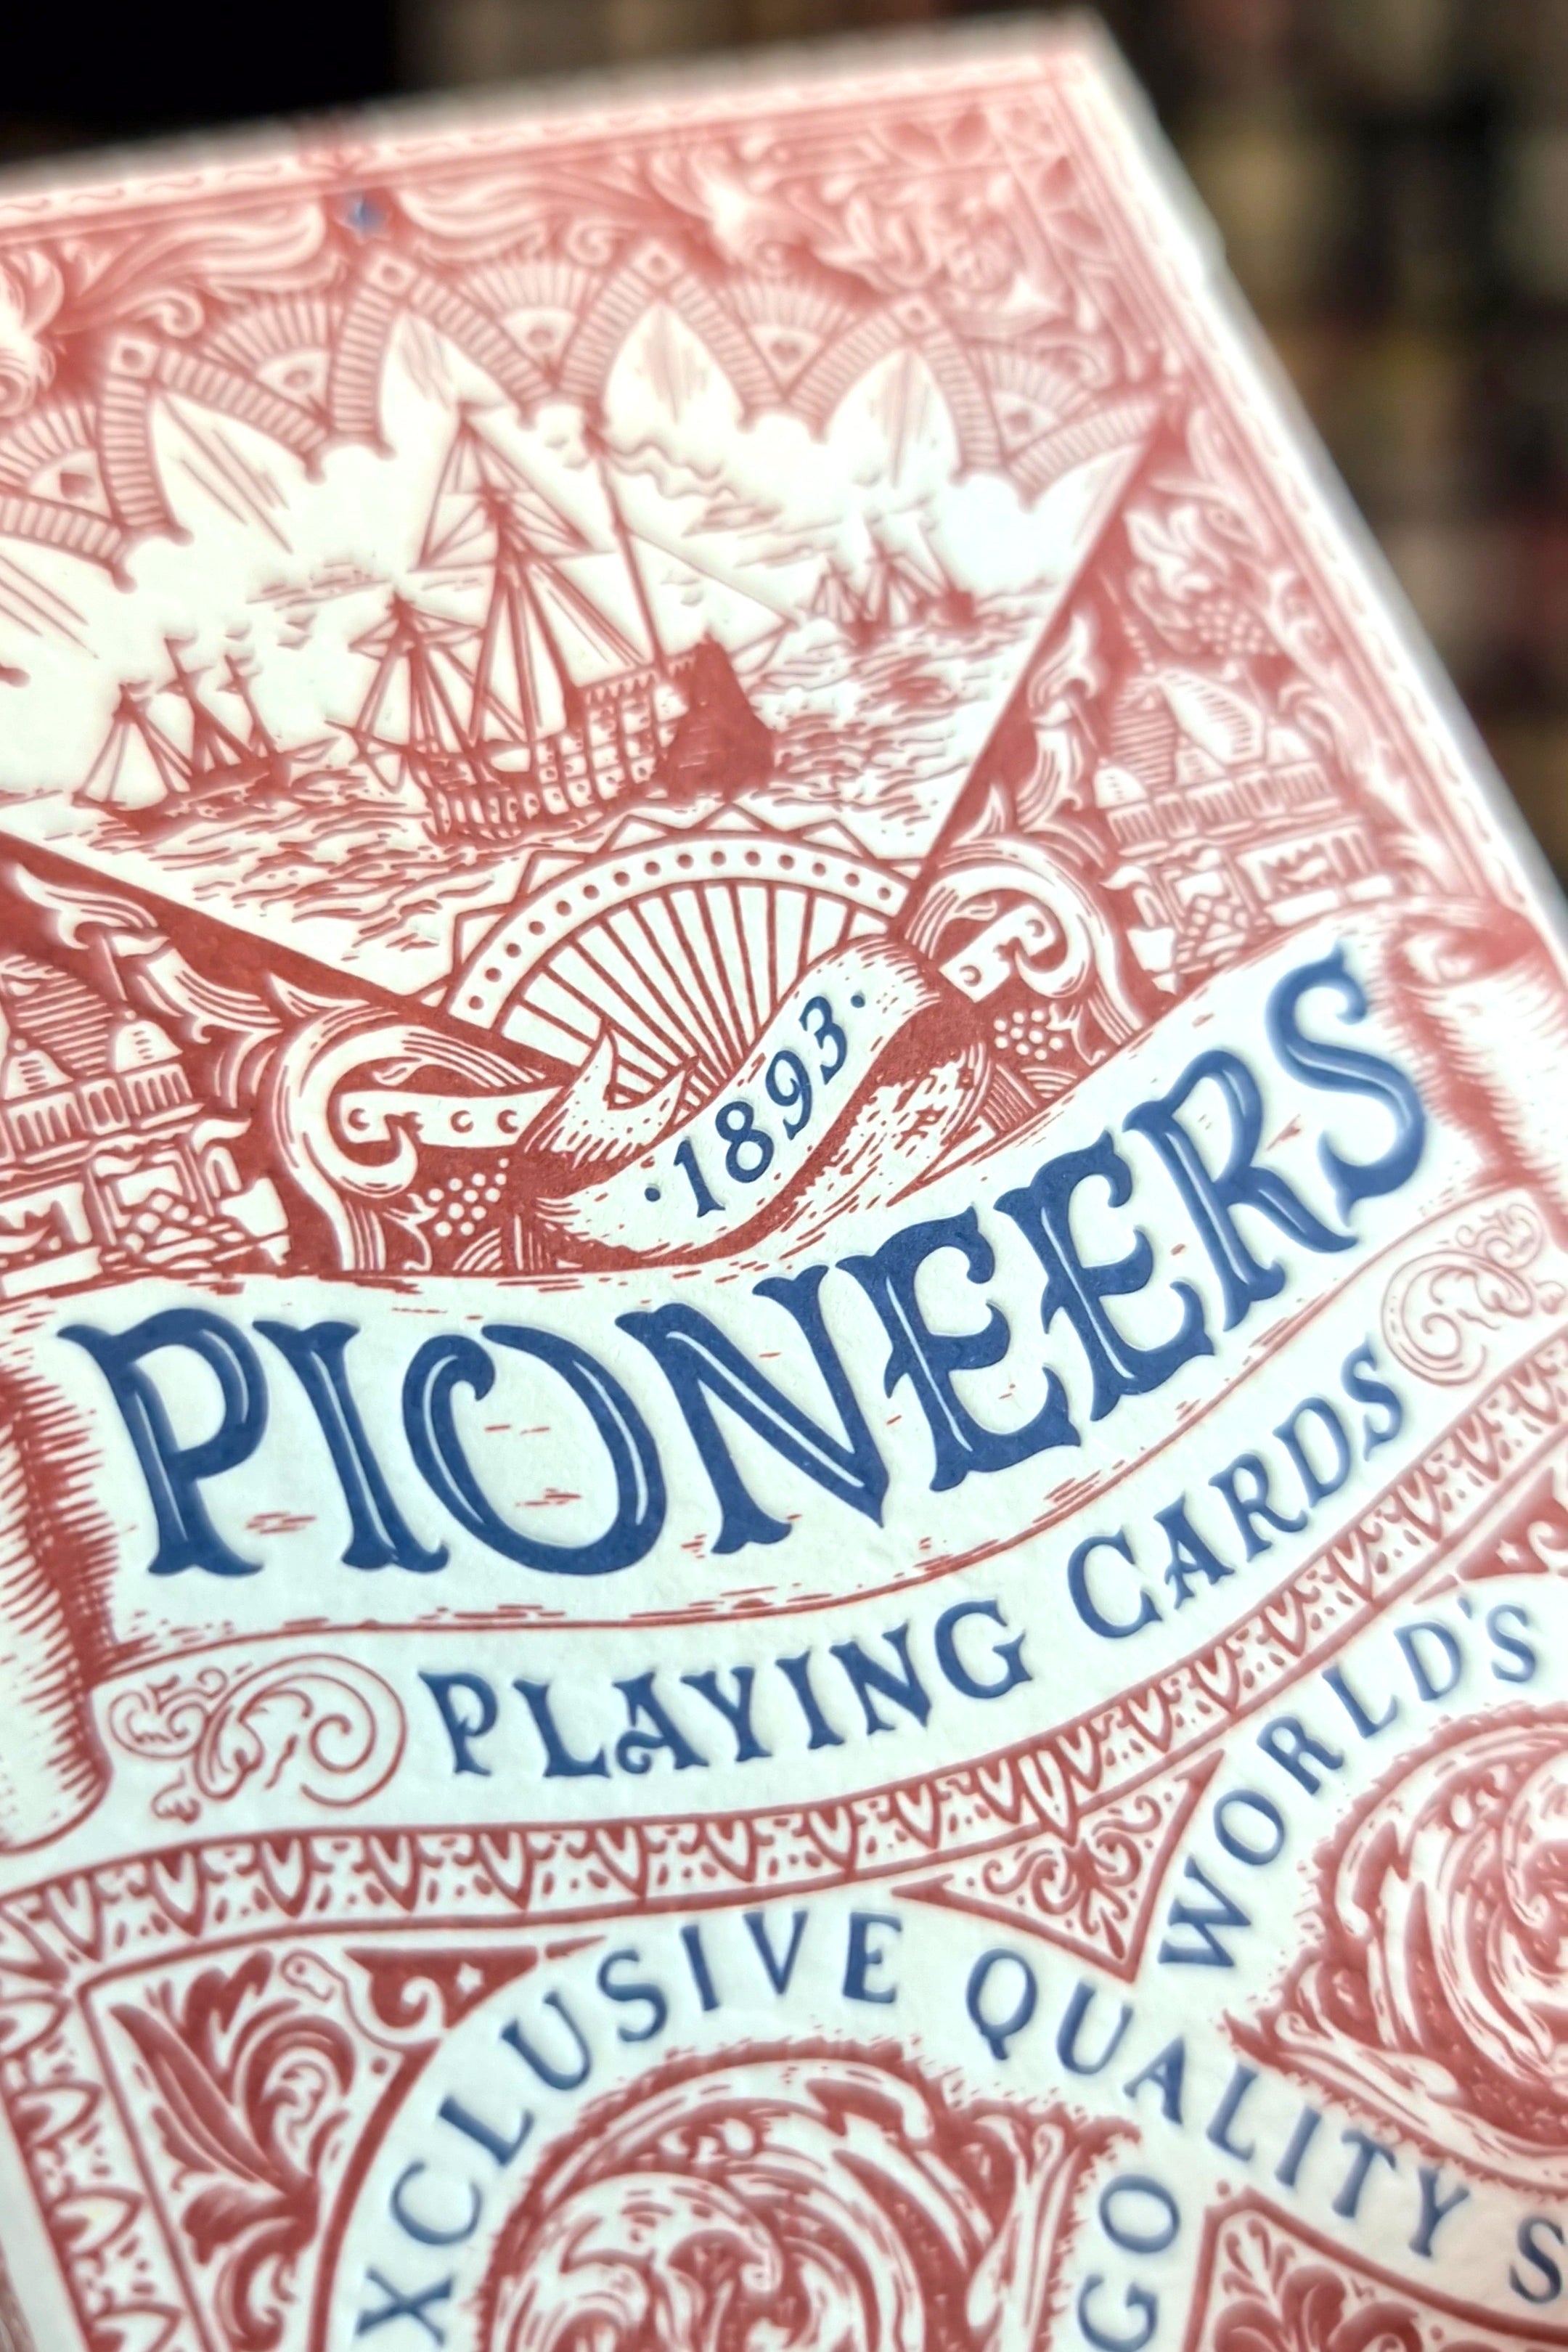 Pioneers Playing Cards by Ellusionist